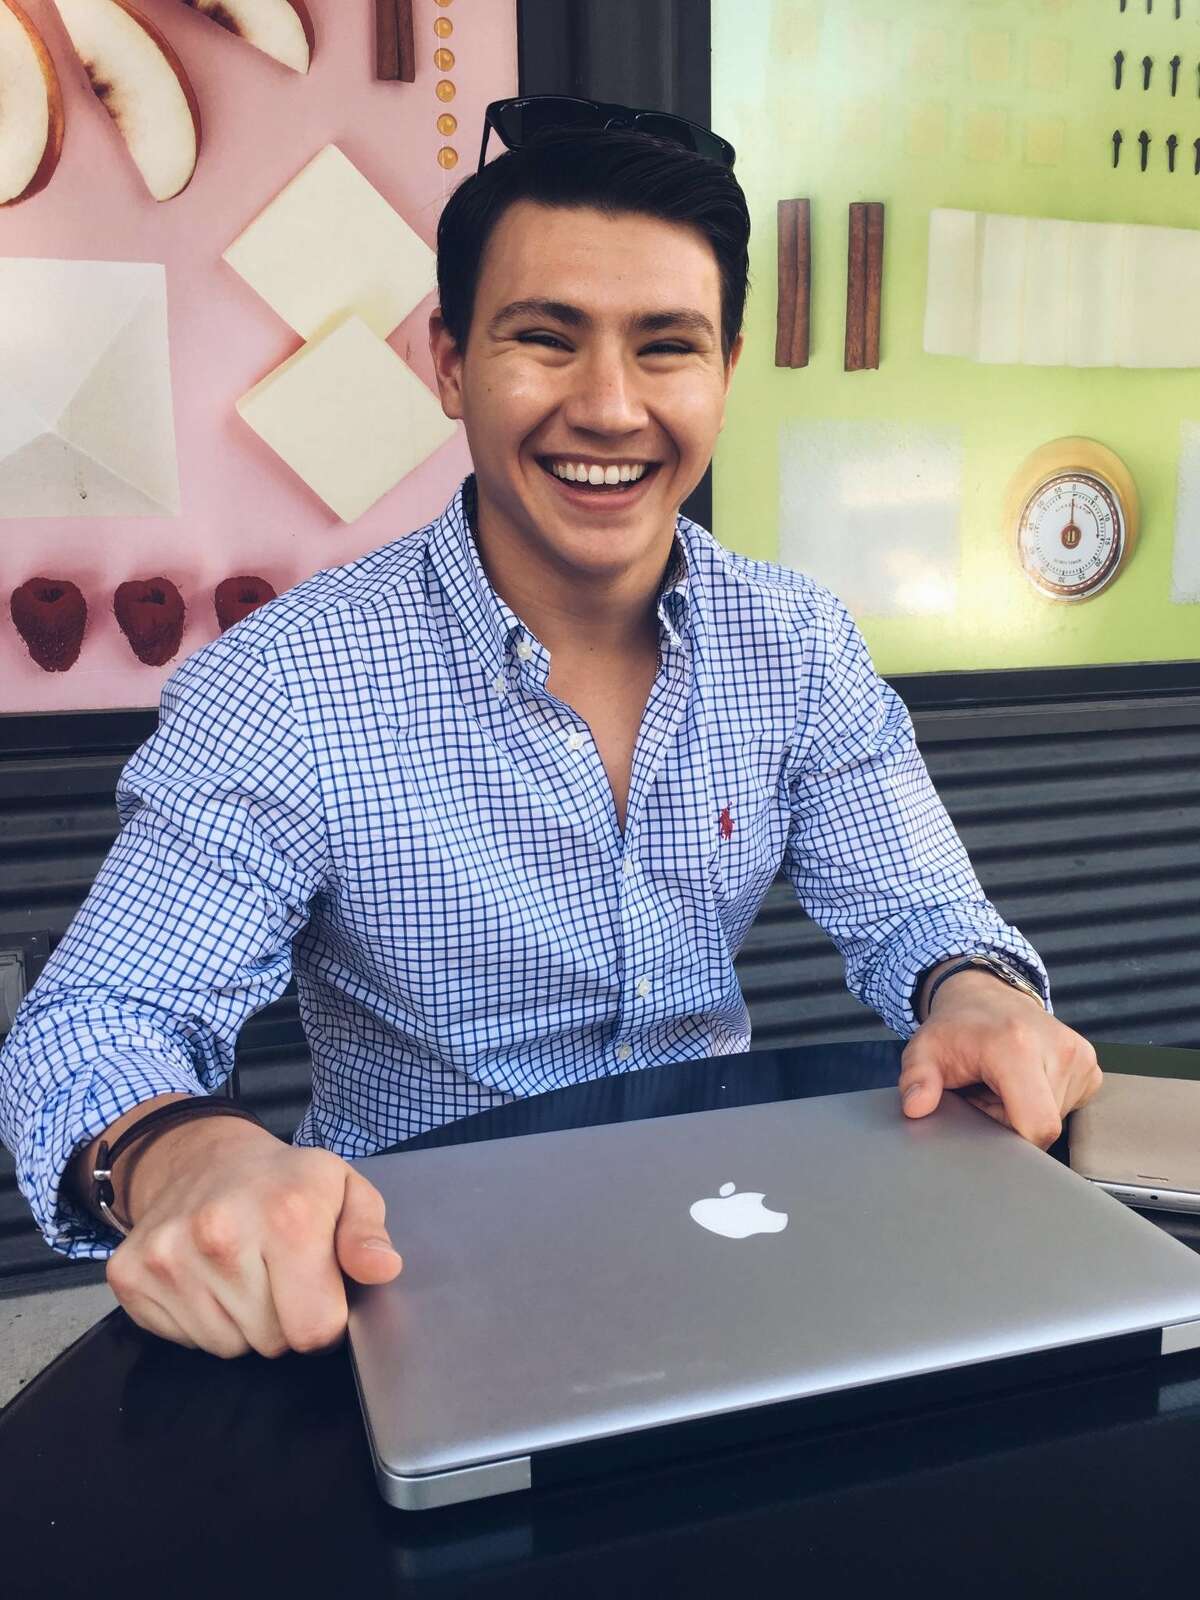 Last week, Cheddar U — a subsidiary of Cheddar and formerly MTV on Campus —featured Jacob Hurrell-Zitelman, a San Antonio native who launched his own cold brew coffee company, Quick Sip, during his sophomore year of college.